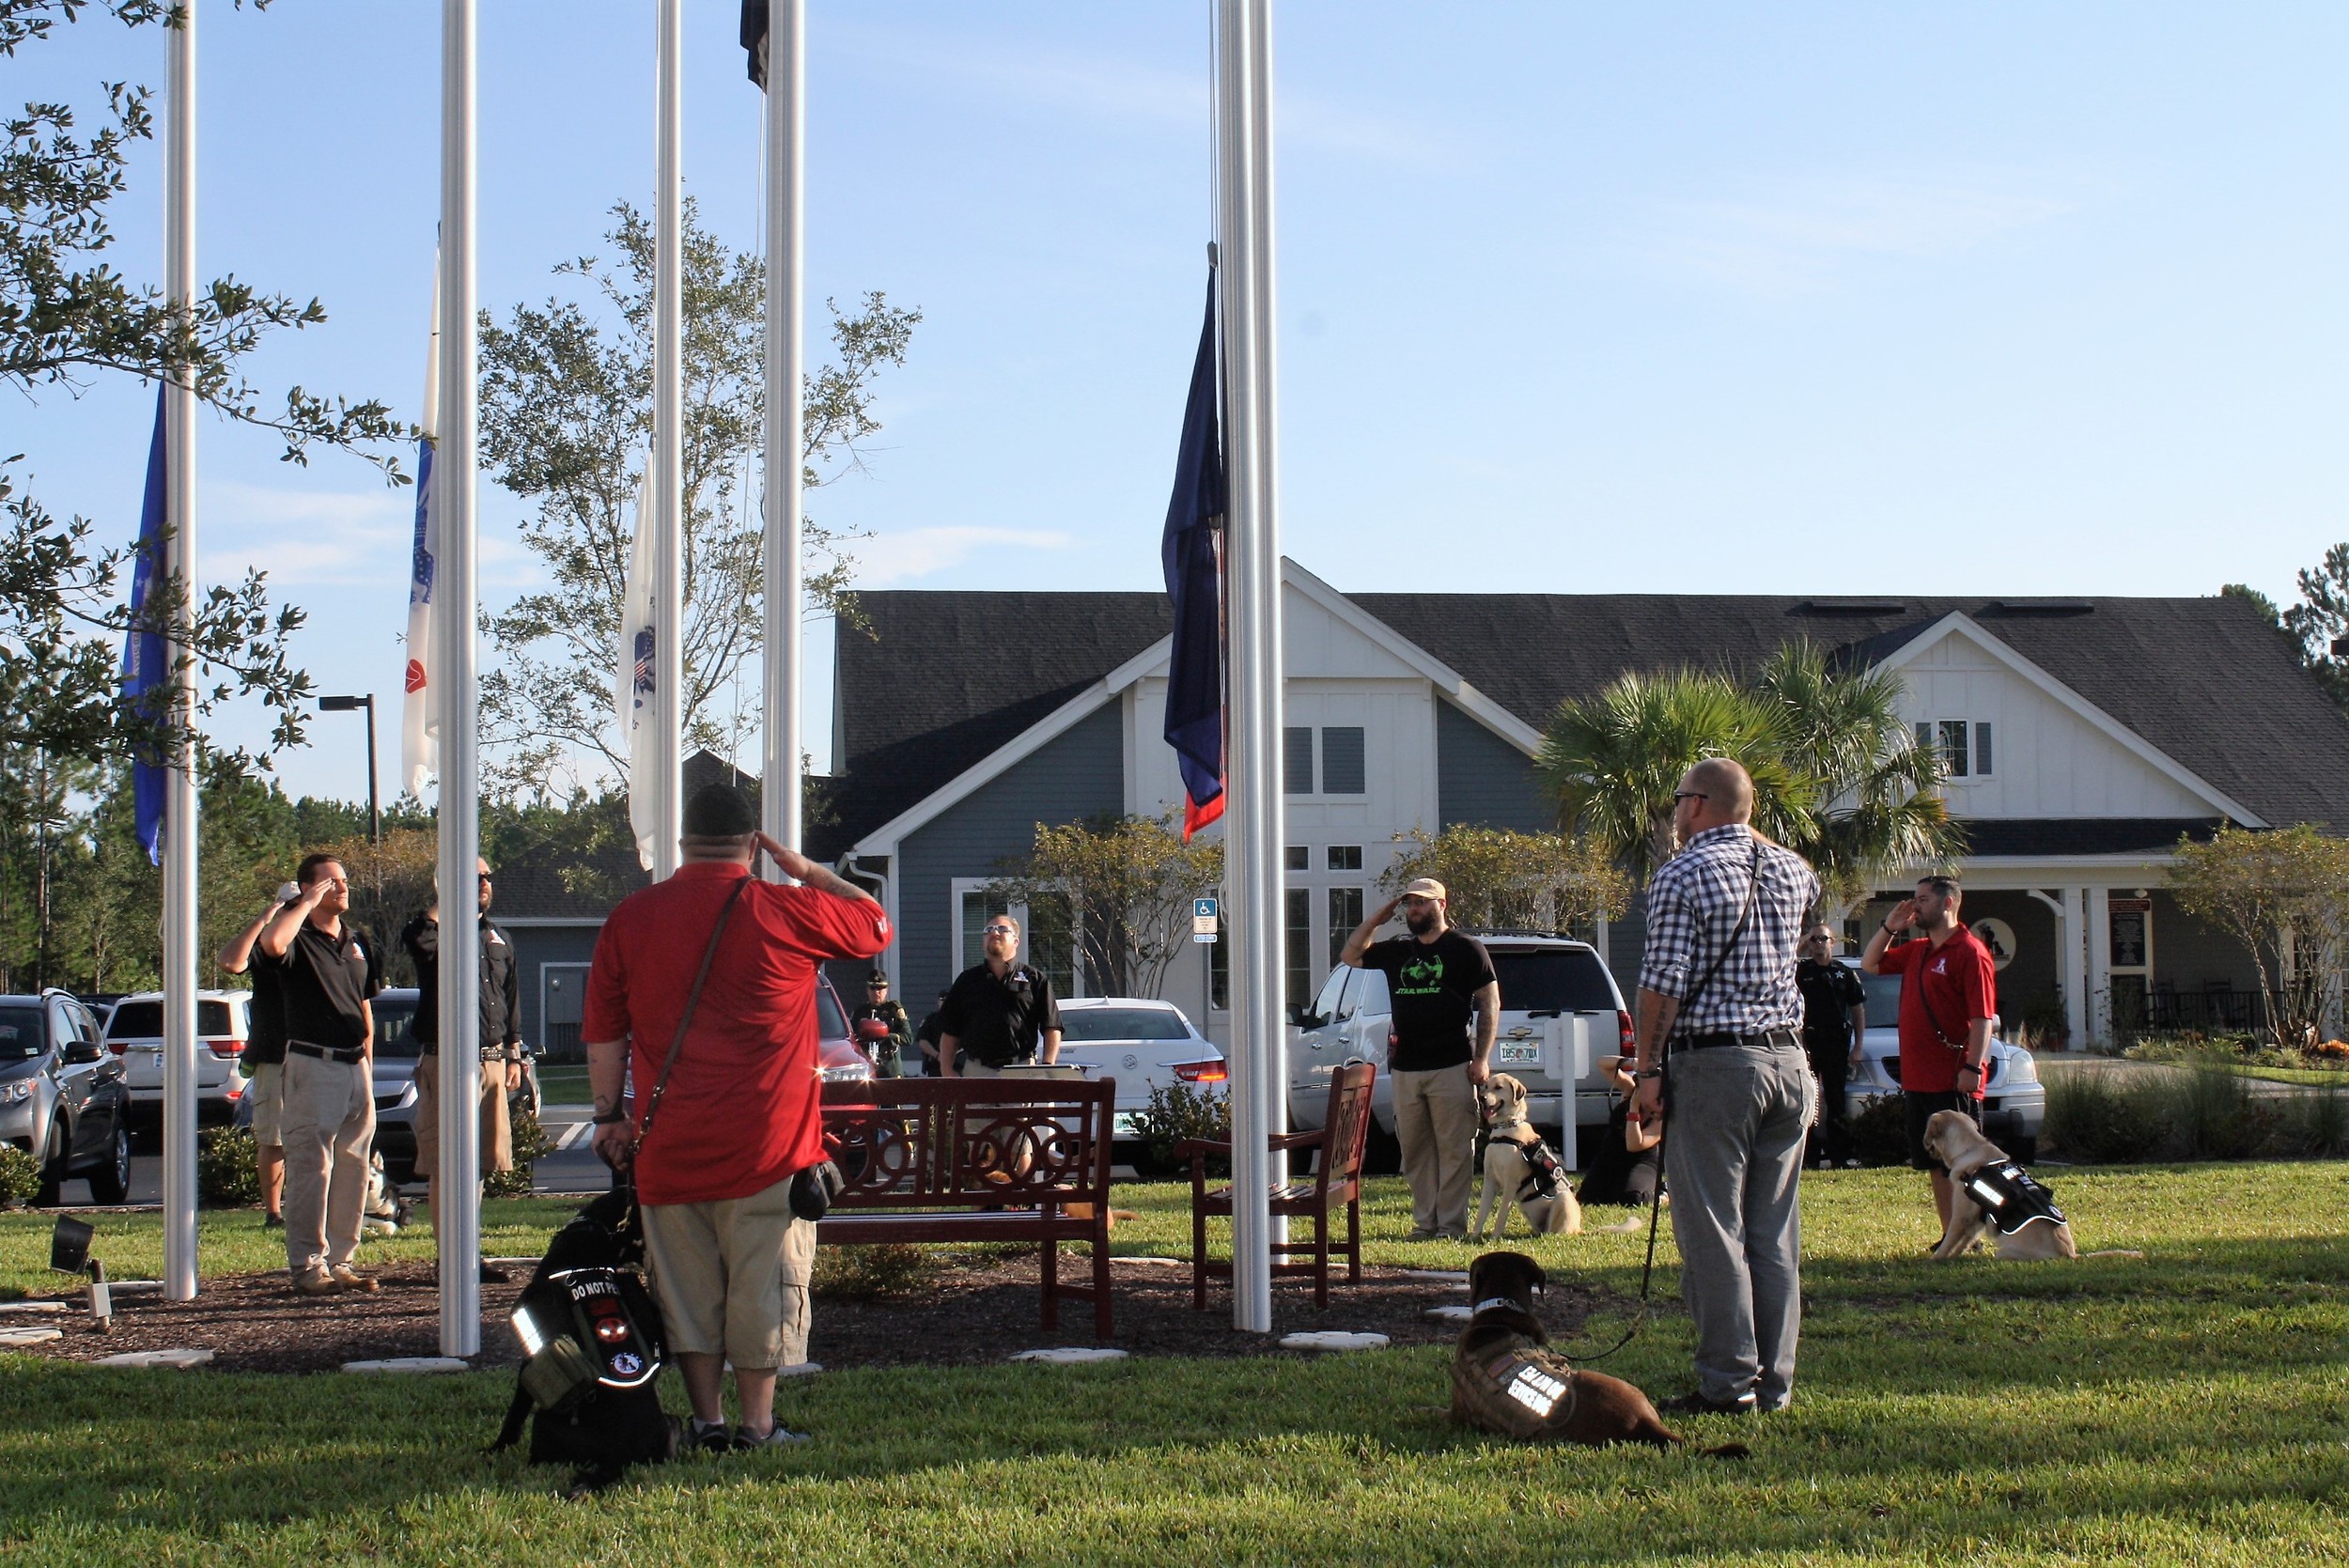 Veterans salute the flag at K9s for Warriors’ 9/11 memorial service held on the 15th anniversary of the terrorist attacks.